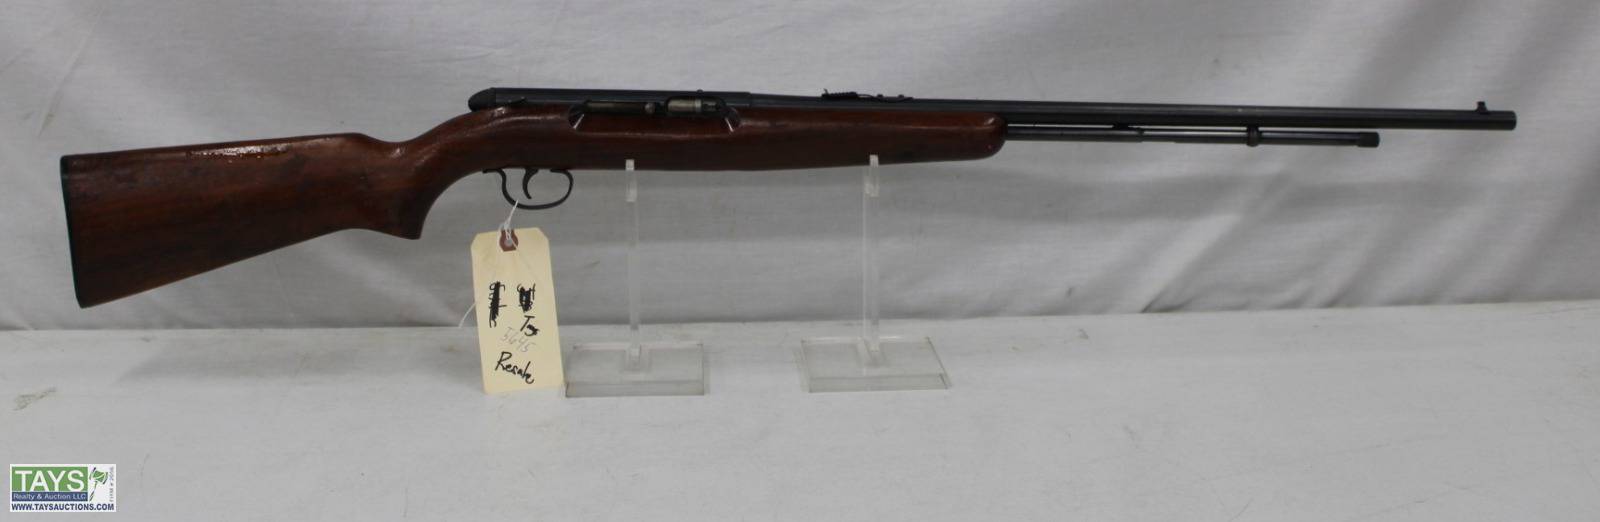 Tays Realty & Auction - Auction: ONLINE ABSOLUTE AUCTION: FIREARMS